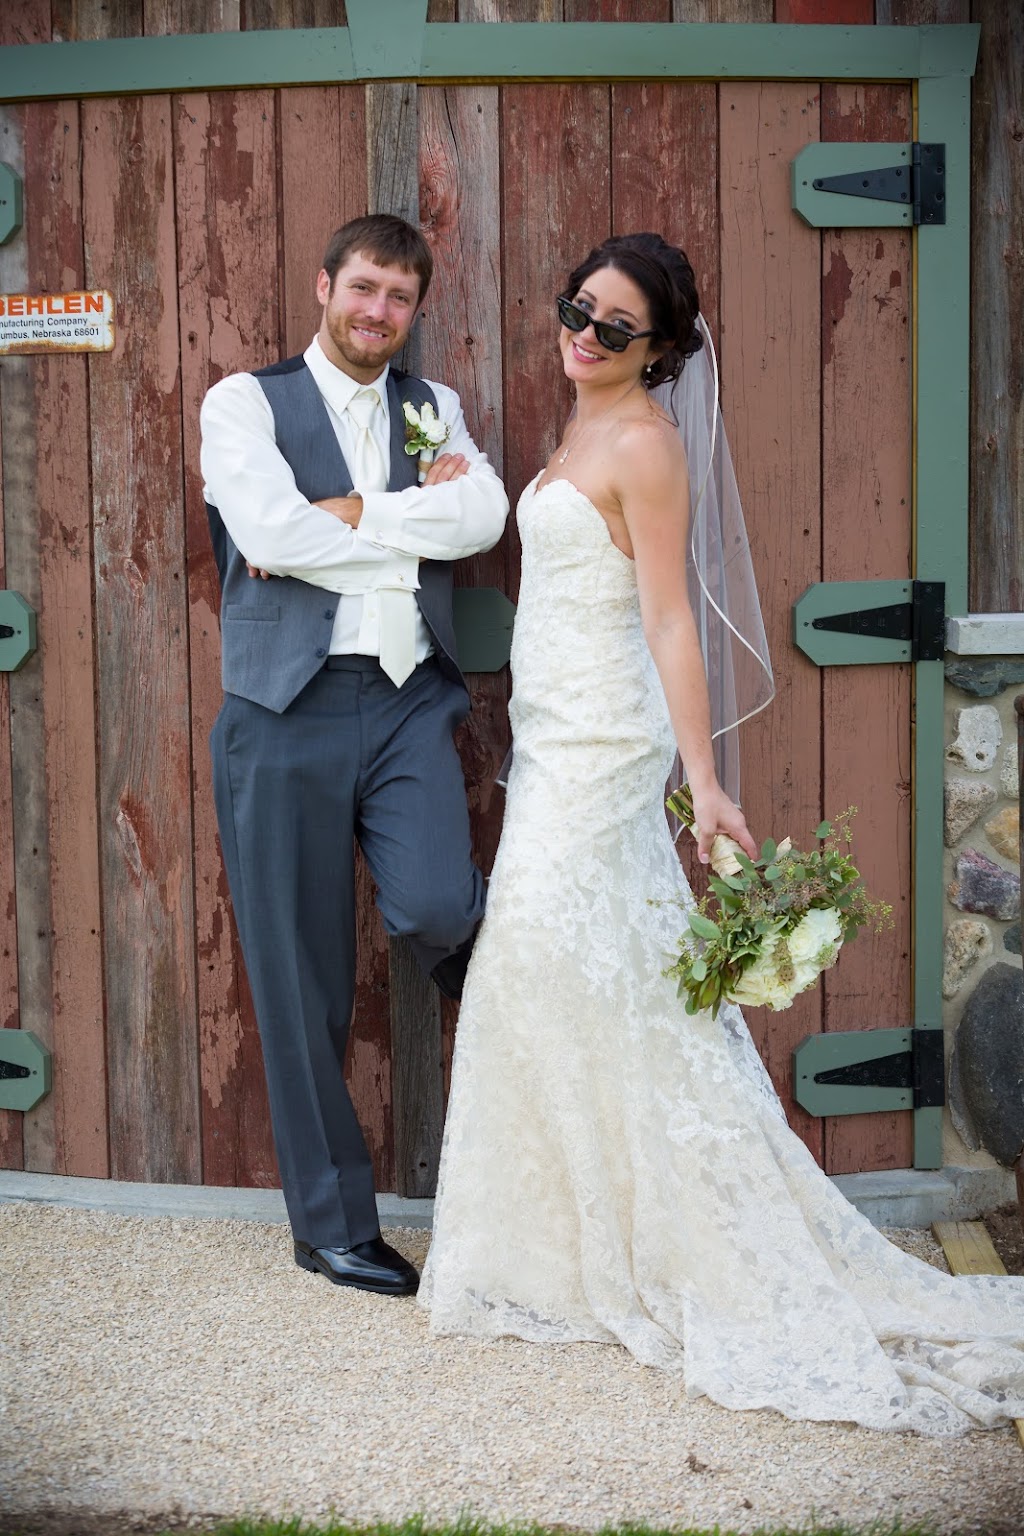 Mark Malec Photography | 1784 Barton Ave STE 8, West Bend, WI 53090, USA | Phone: (262) 808-7931